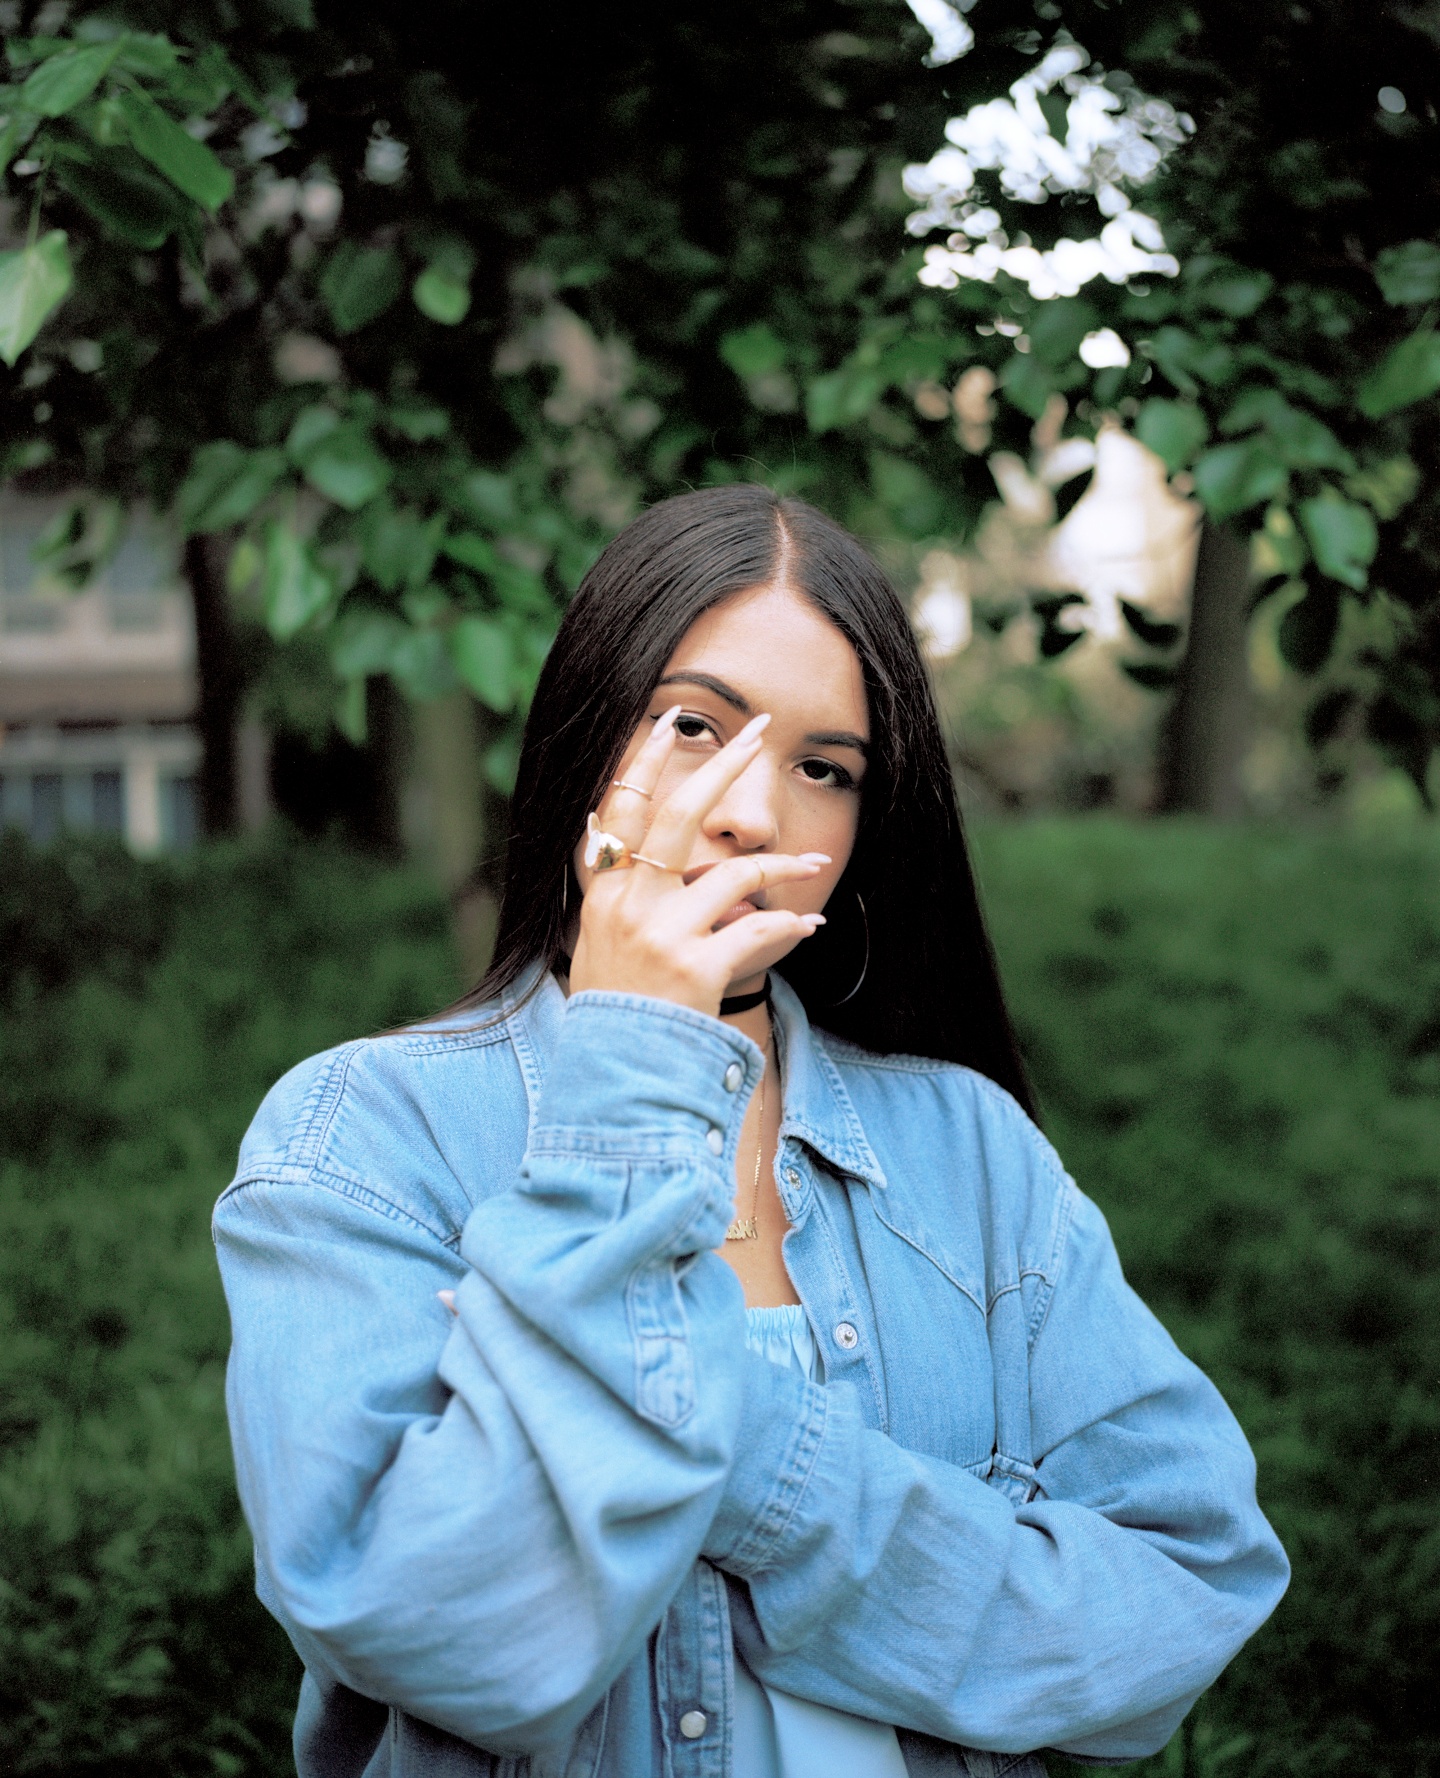 Mabel Is Neneh Cherry’s Daughter, But She’s Finding Her Own R&B Groove